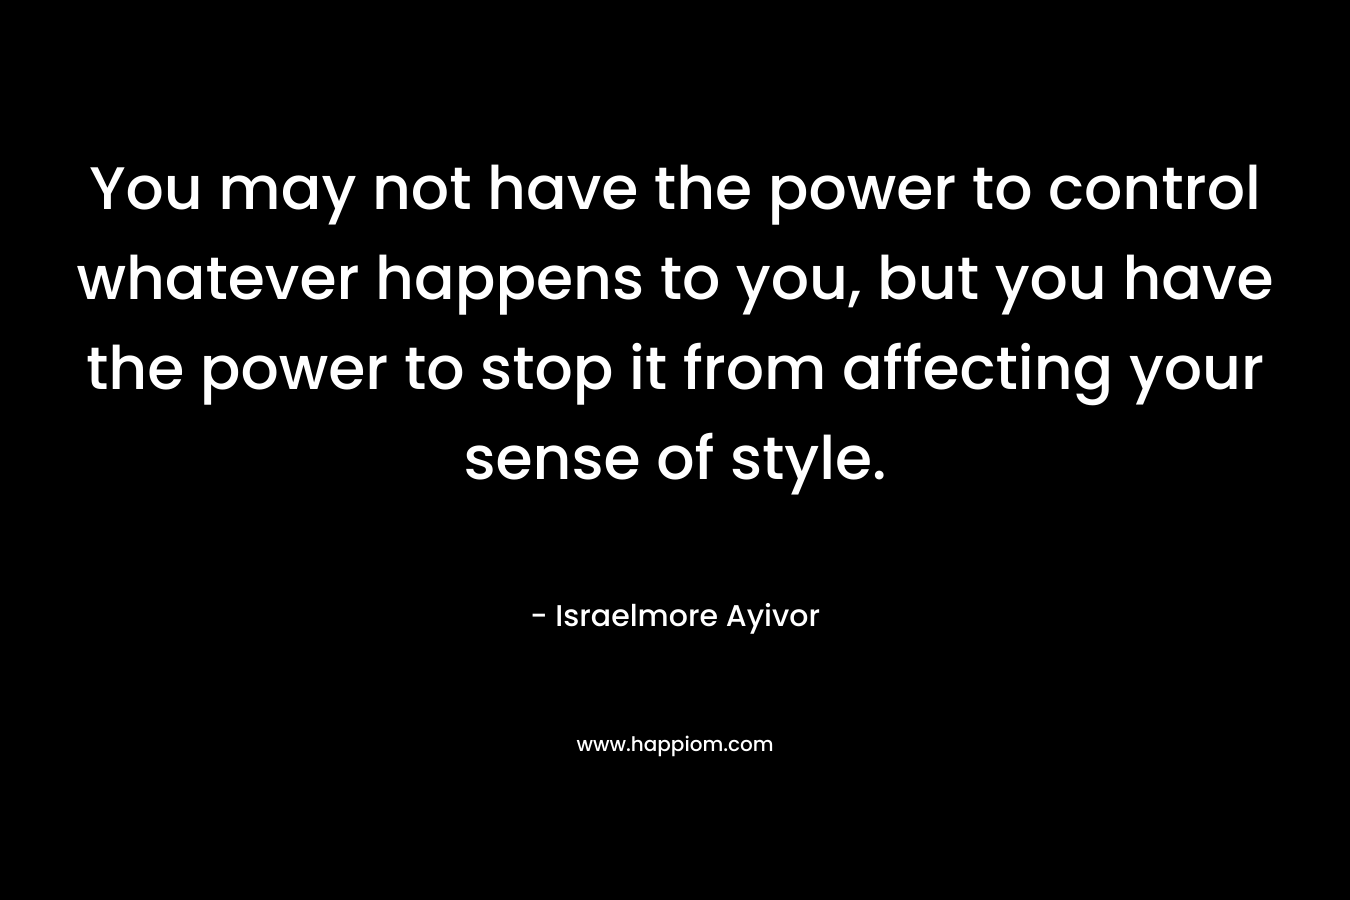 You may not have the power to control whatever happens to you, but you have the power to stop it from affecting your sense of style.